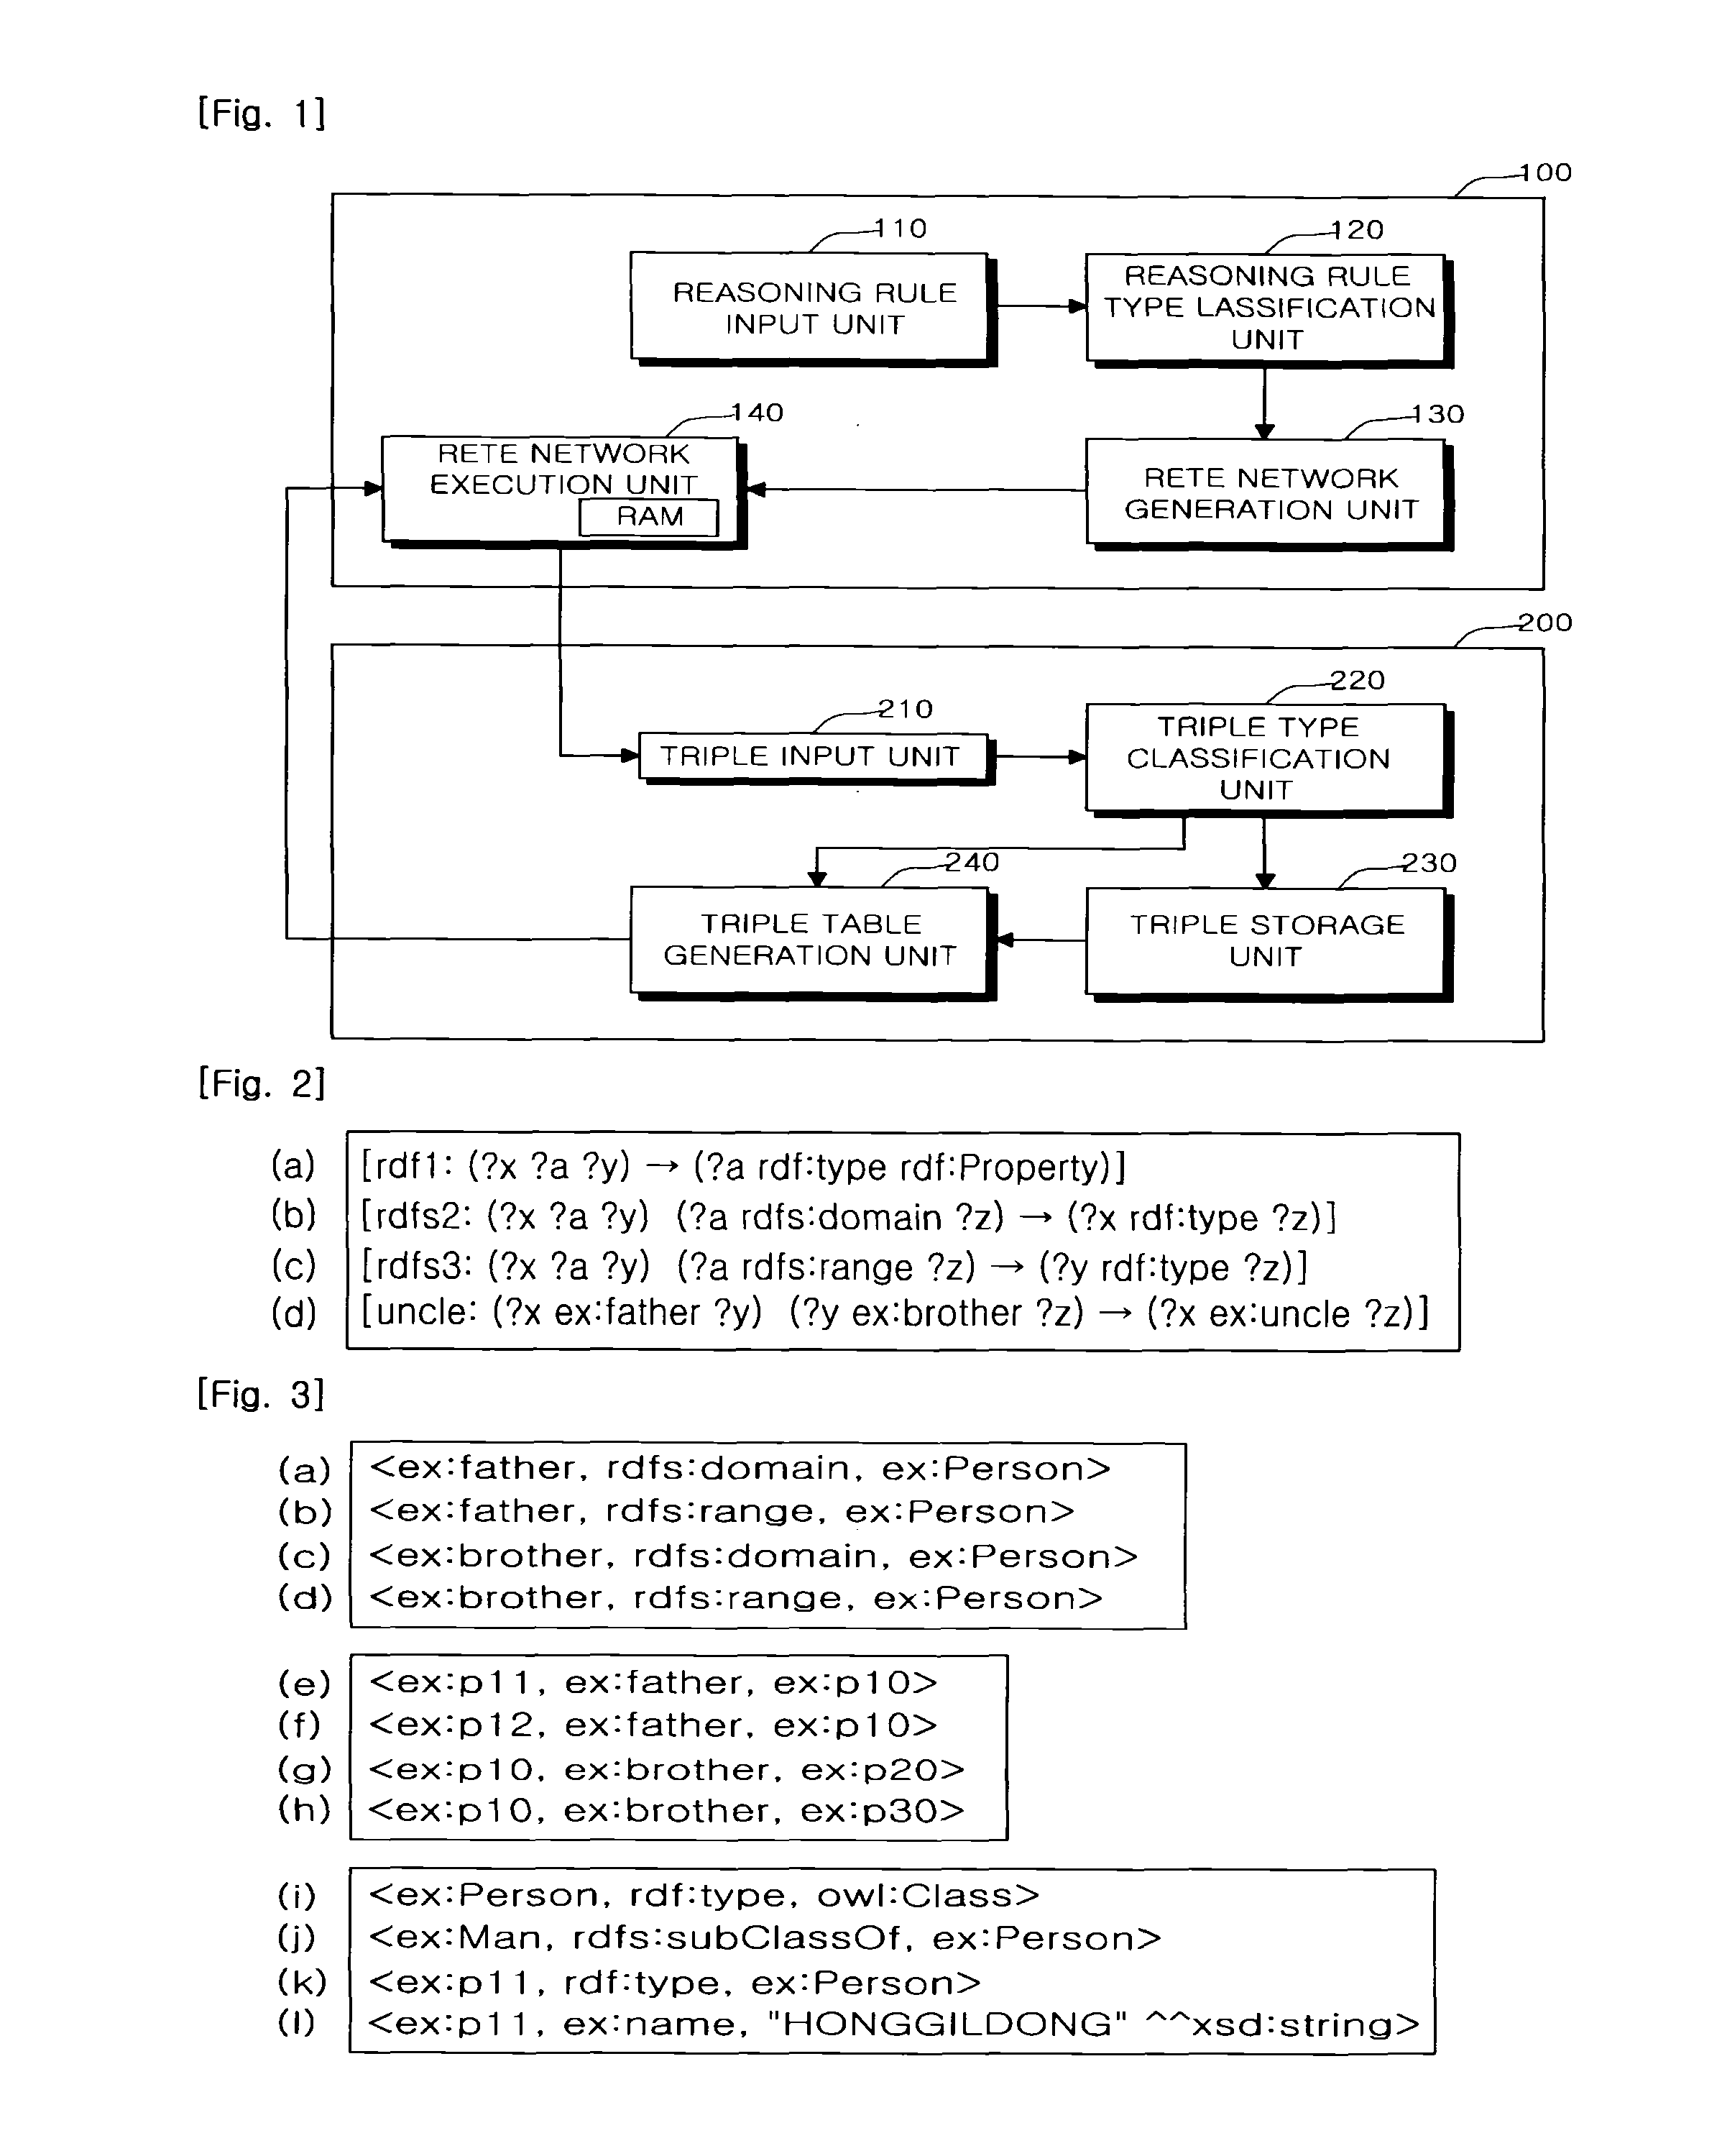 System and method for hybrid rete reasoning based on in-memory and dbms